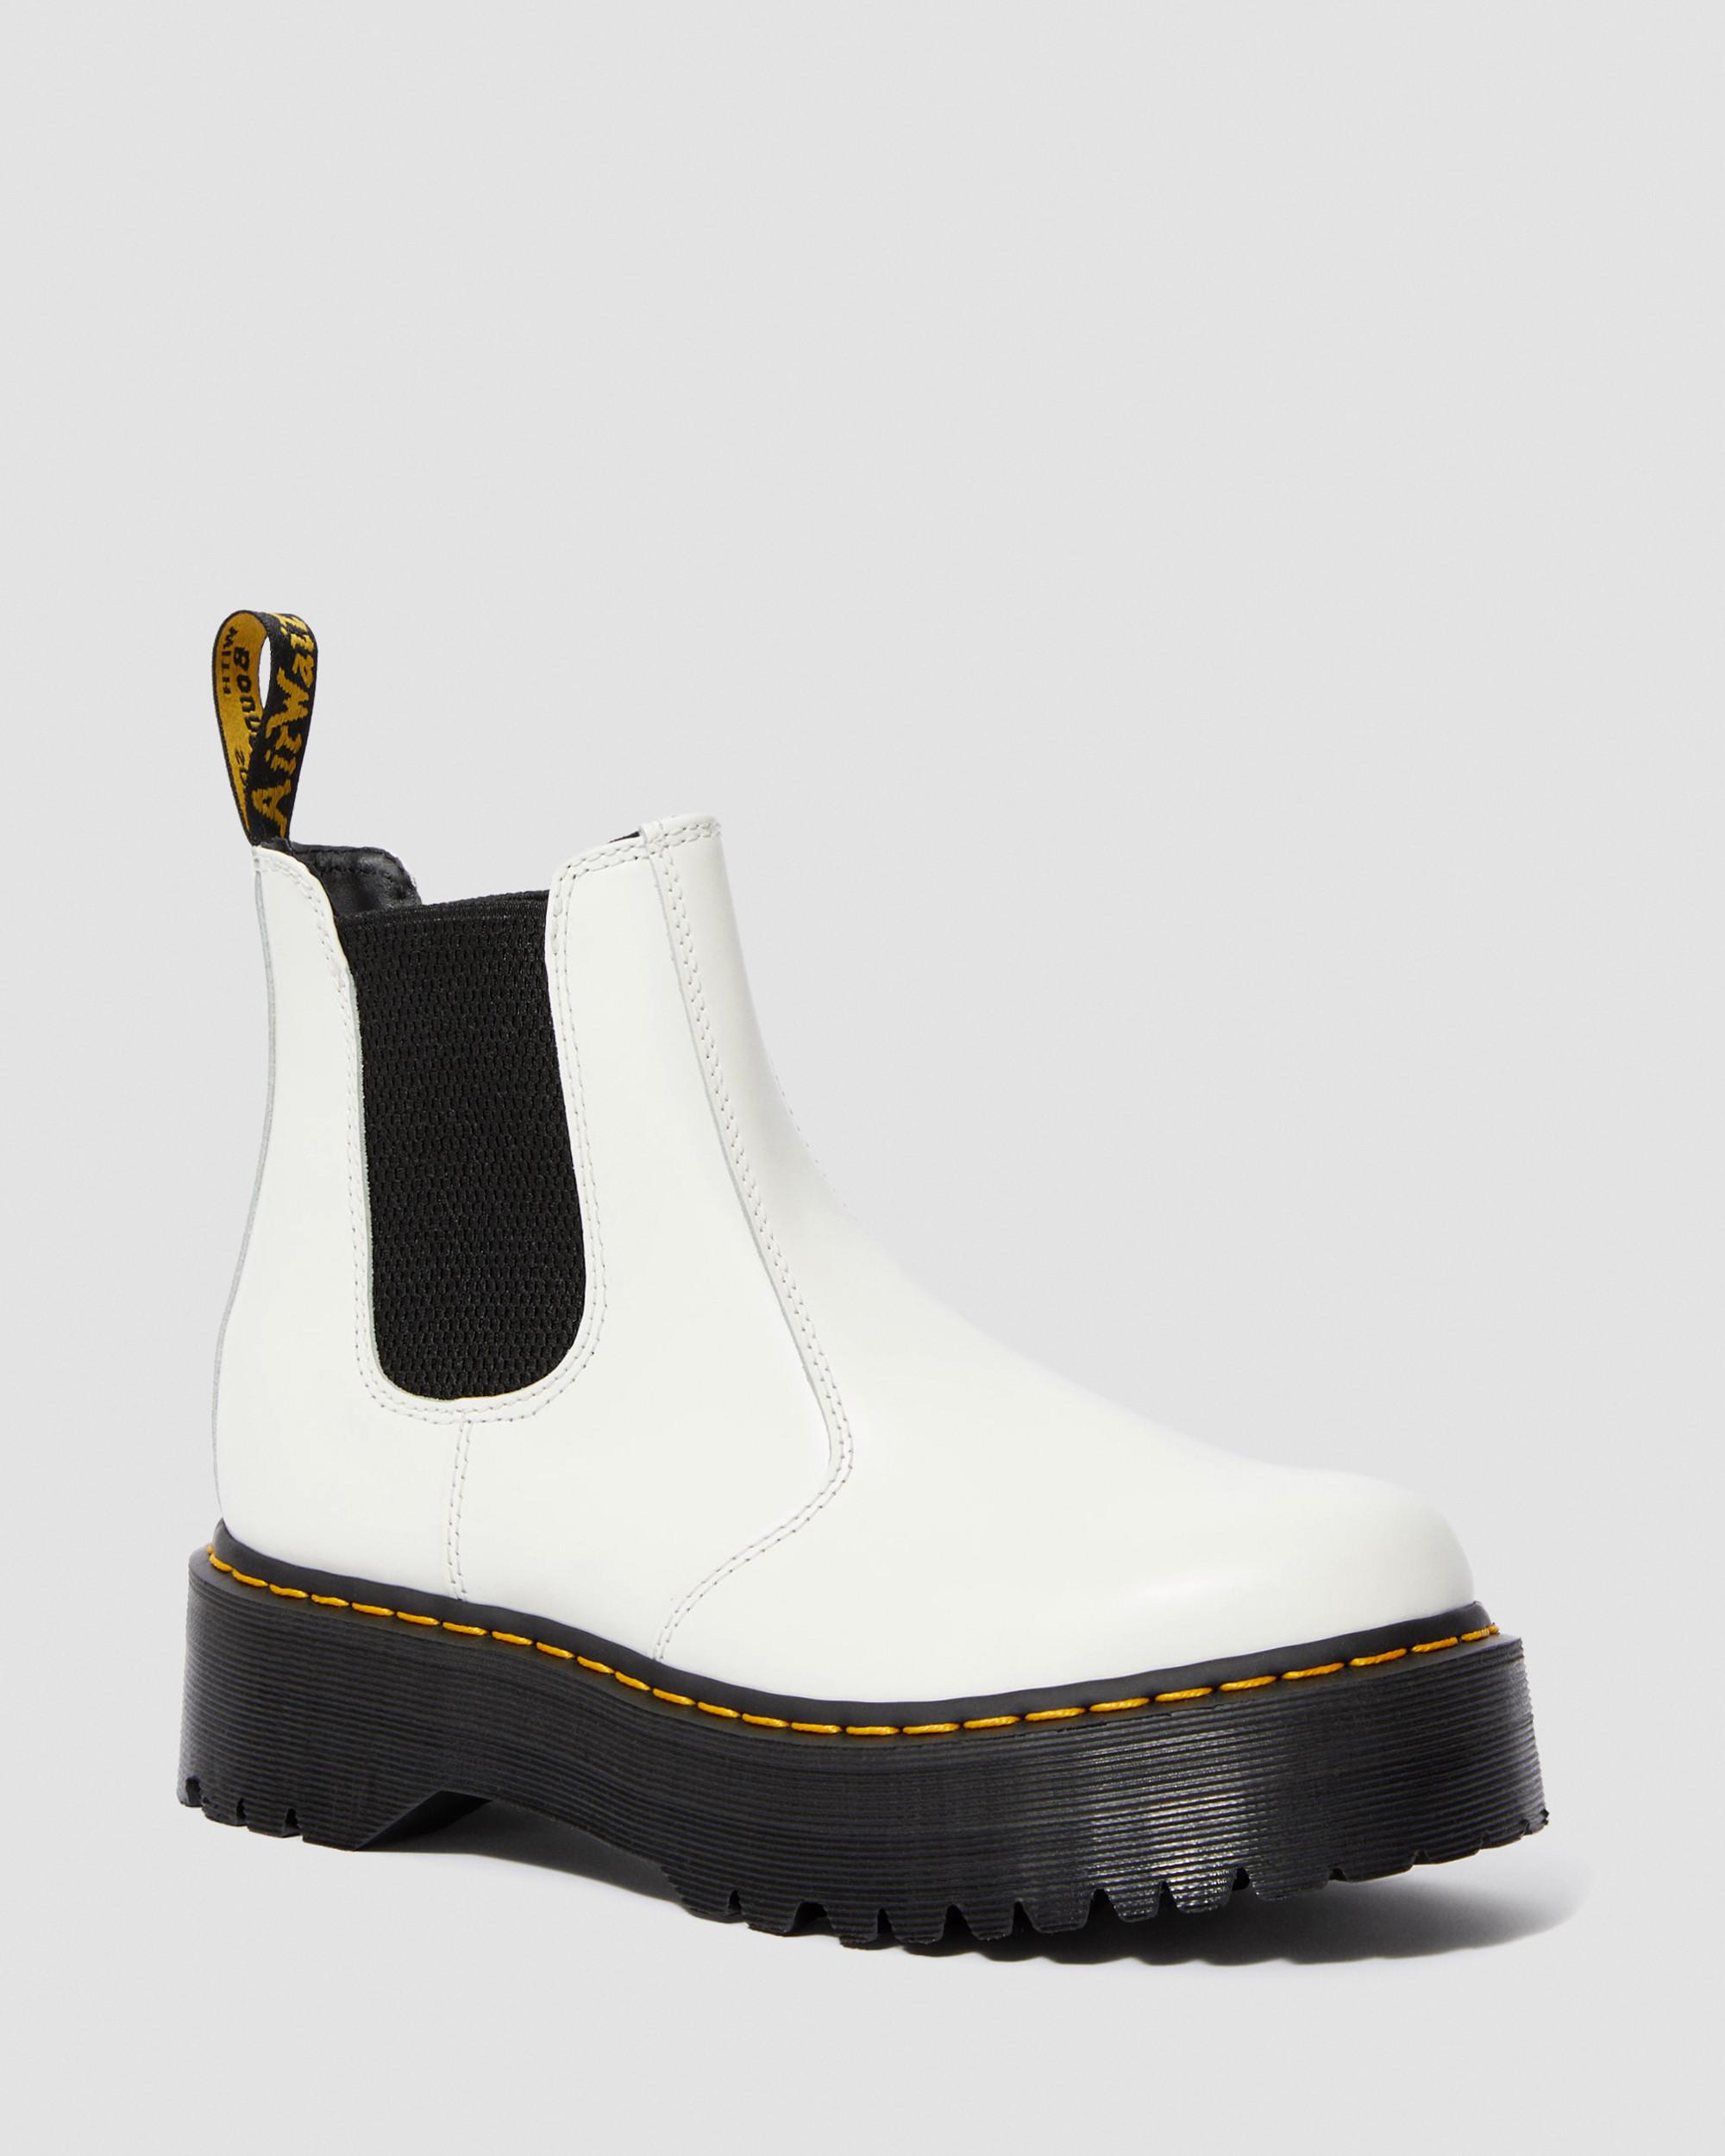 dr martens 2976 chelsea boots womens